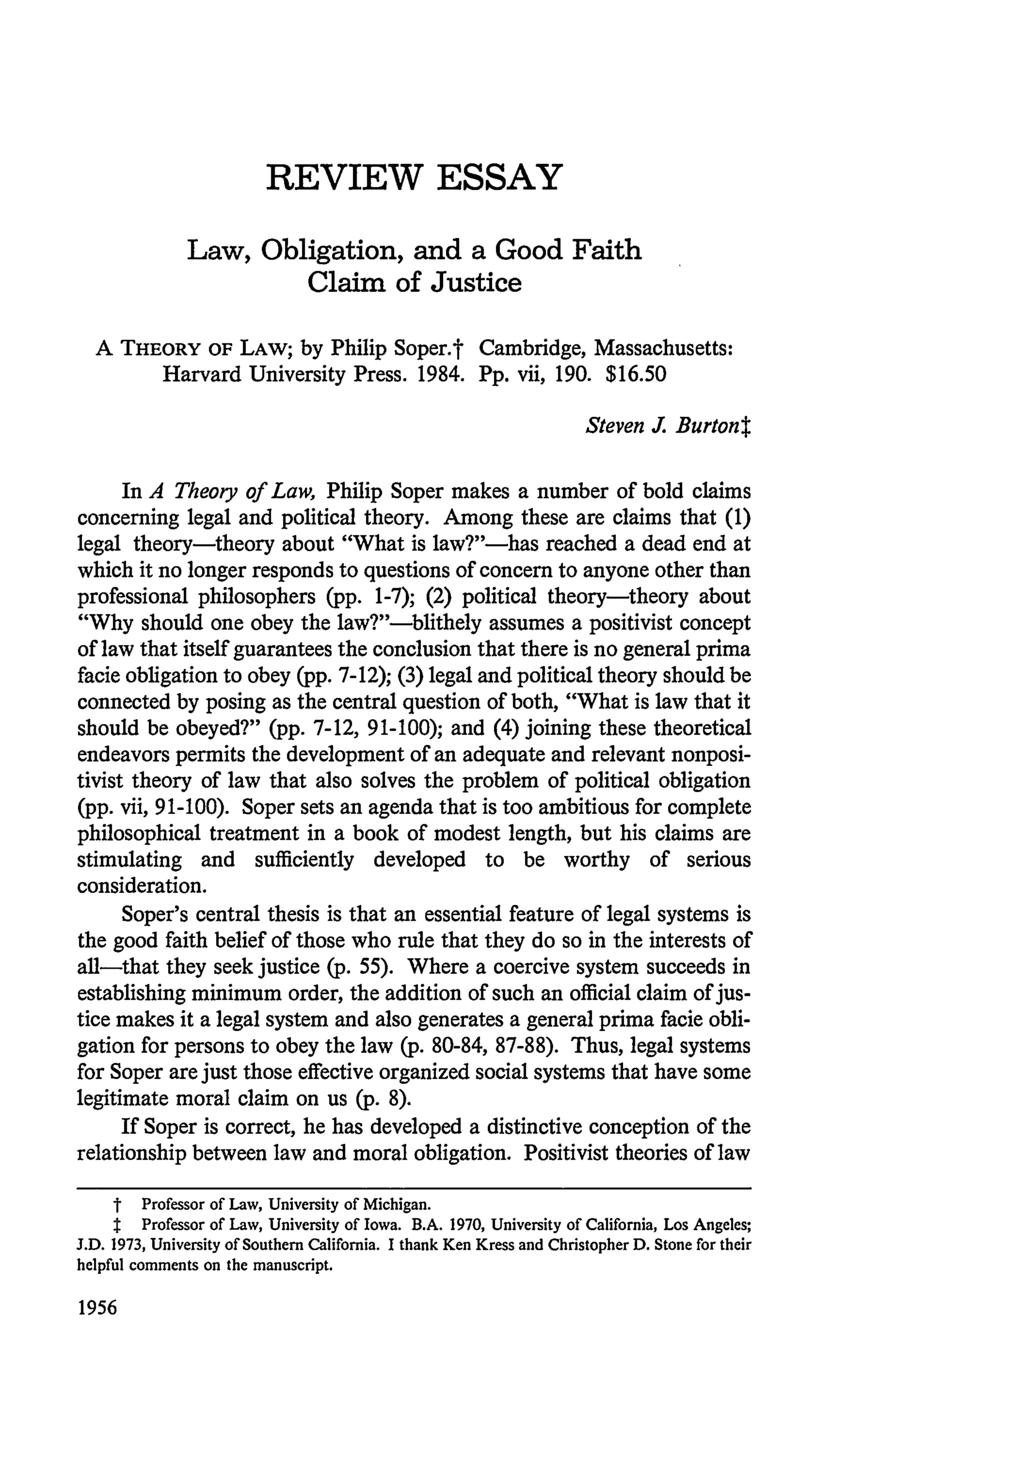 REVIEW ESSAY Law, Obligation, and a Good Faith Claim of Justice A THEORY OF LAW; by Philip Soper.t Cambridge, Massachusetts: Harvard University Press. 1984. Pp. vii, 190. $16.50 Steven J.